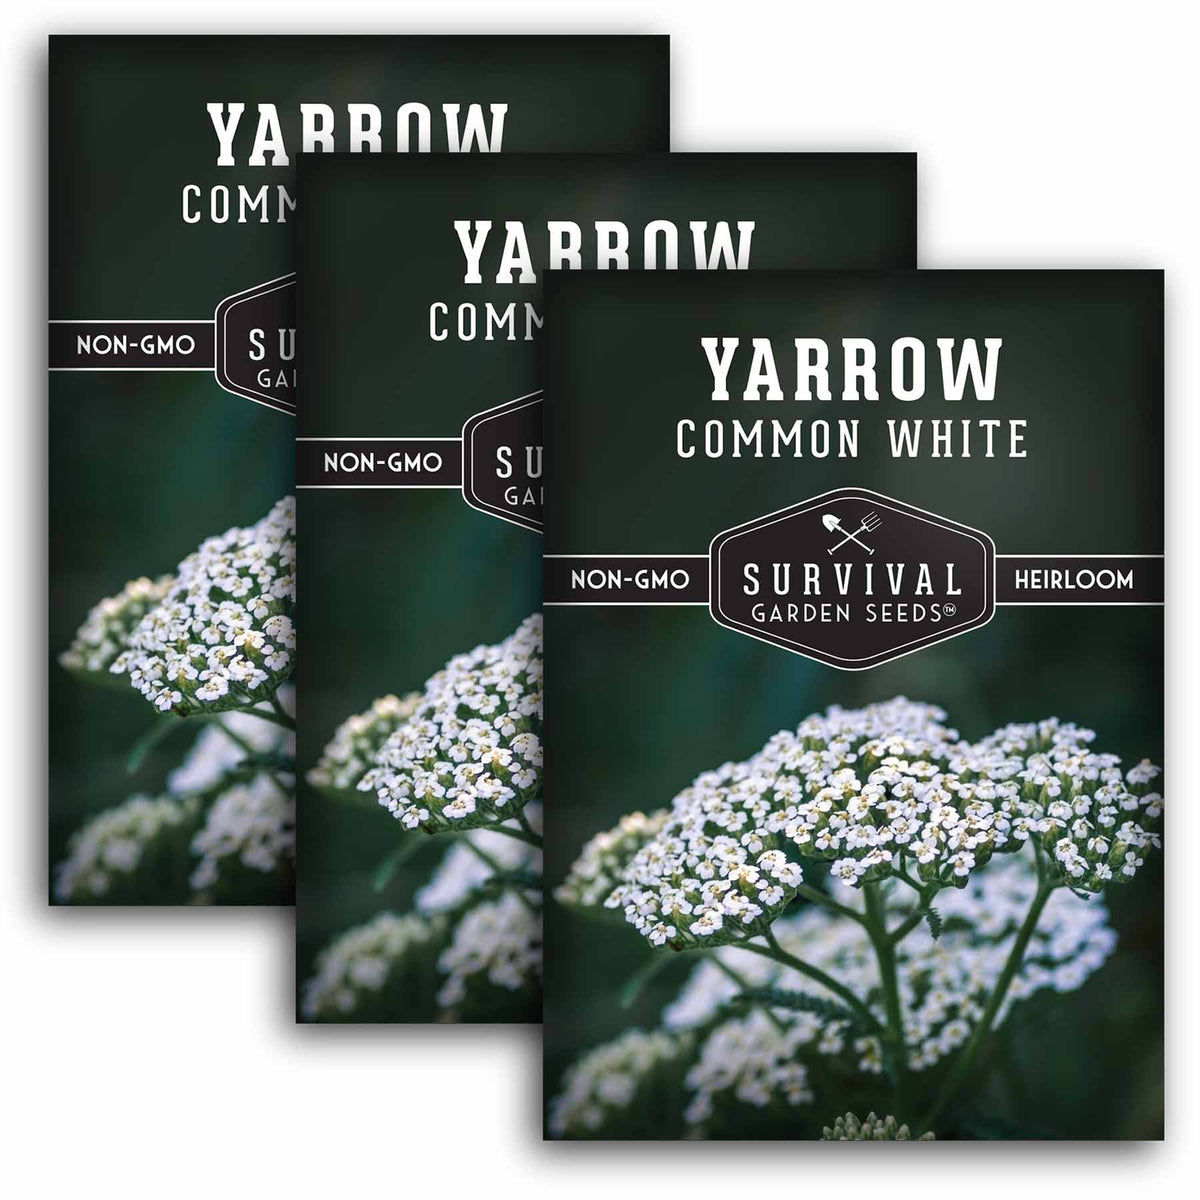 3 packets of White Yarrow seeds